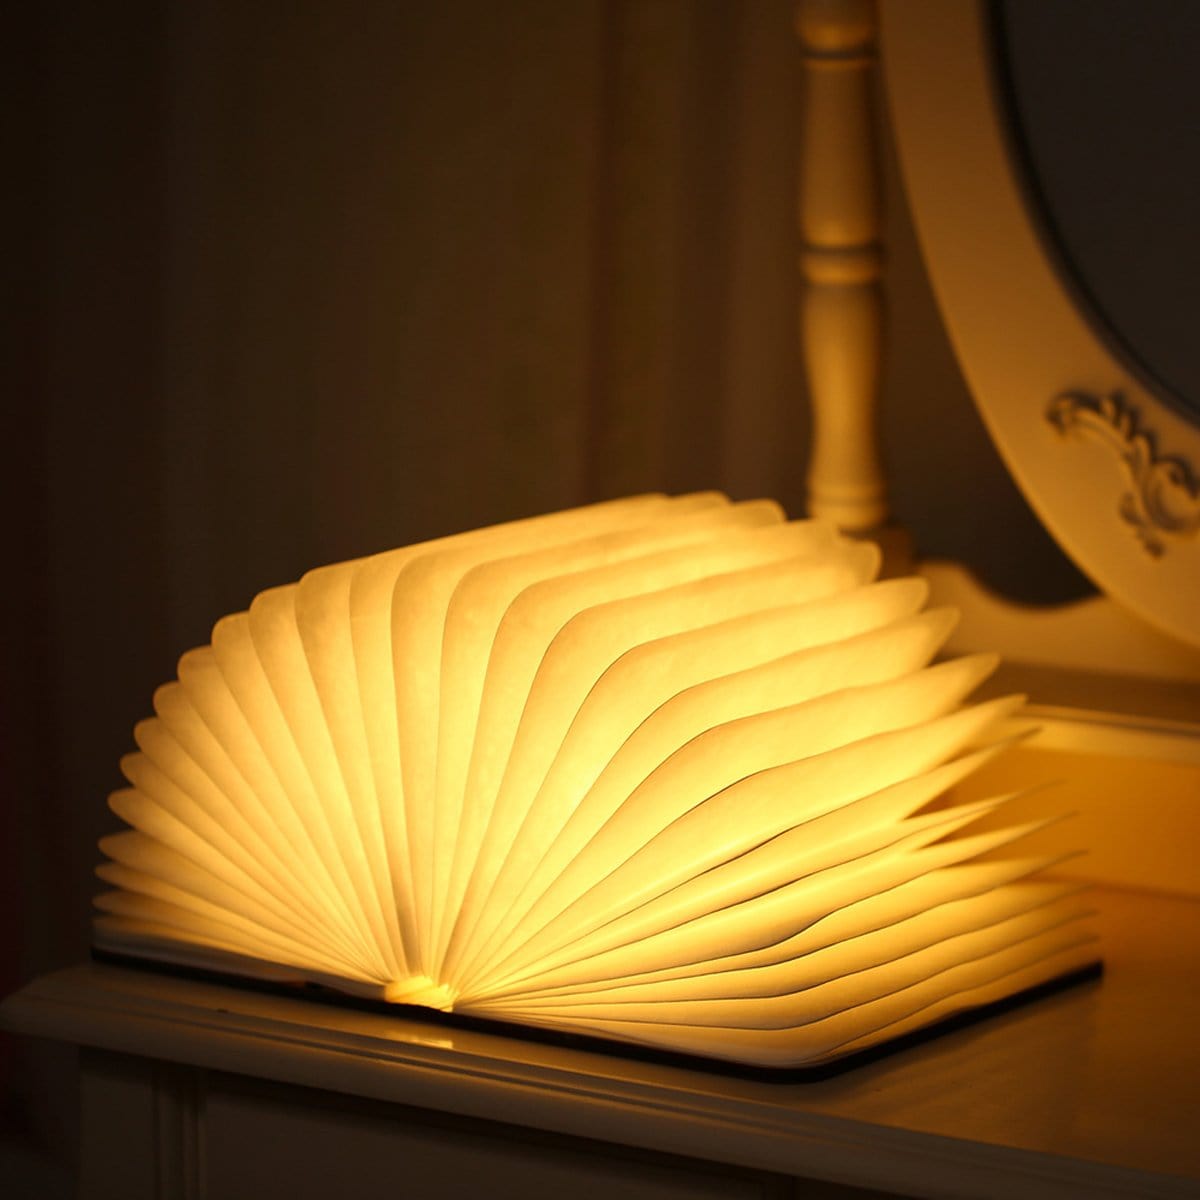 I Will Always Be With You - LED Folding Book Light -Dad To Son